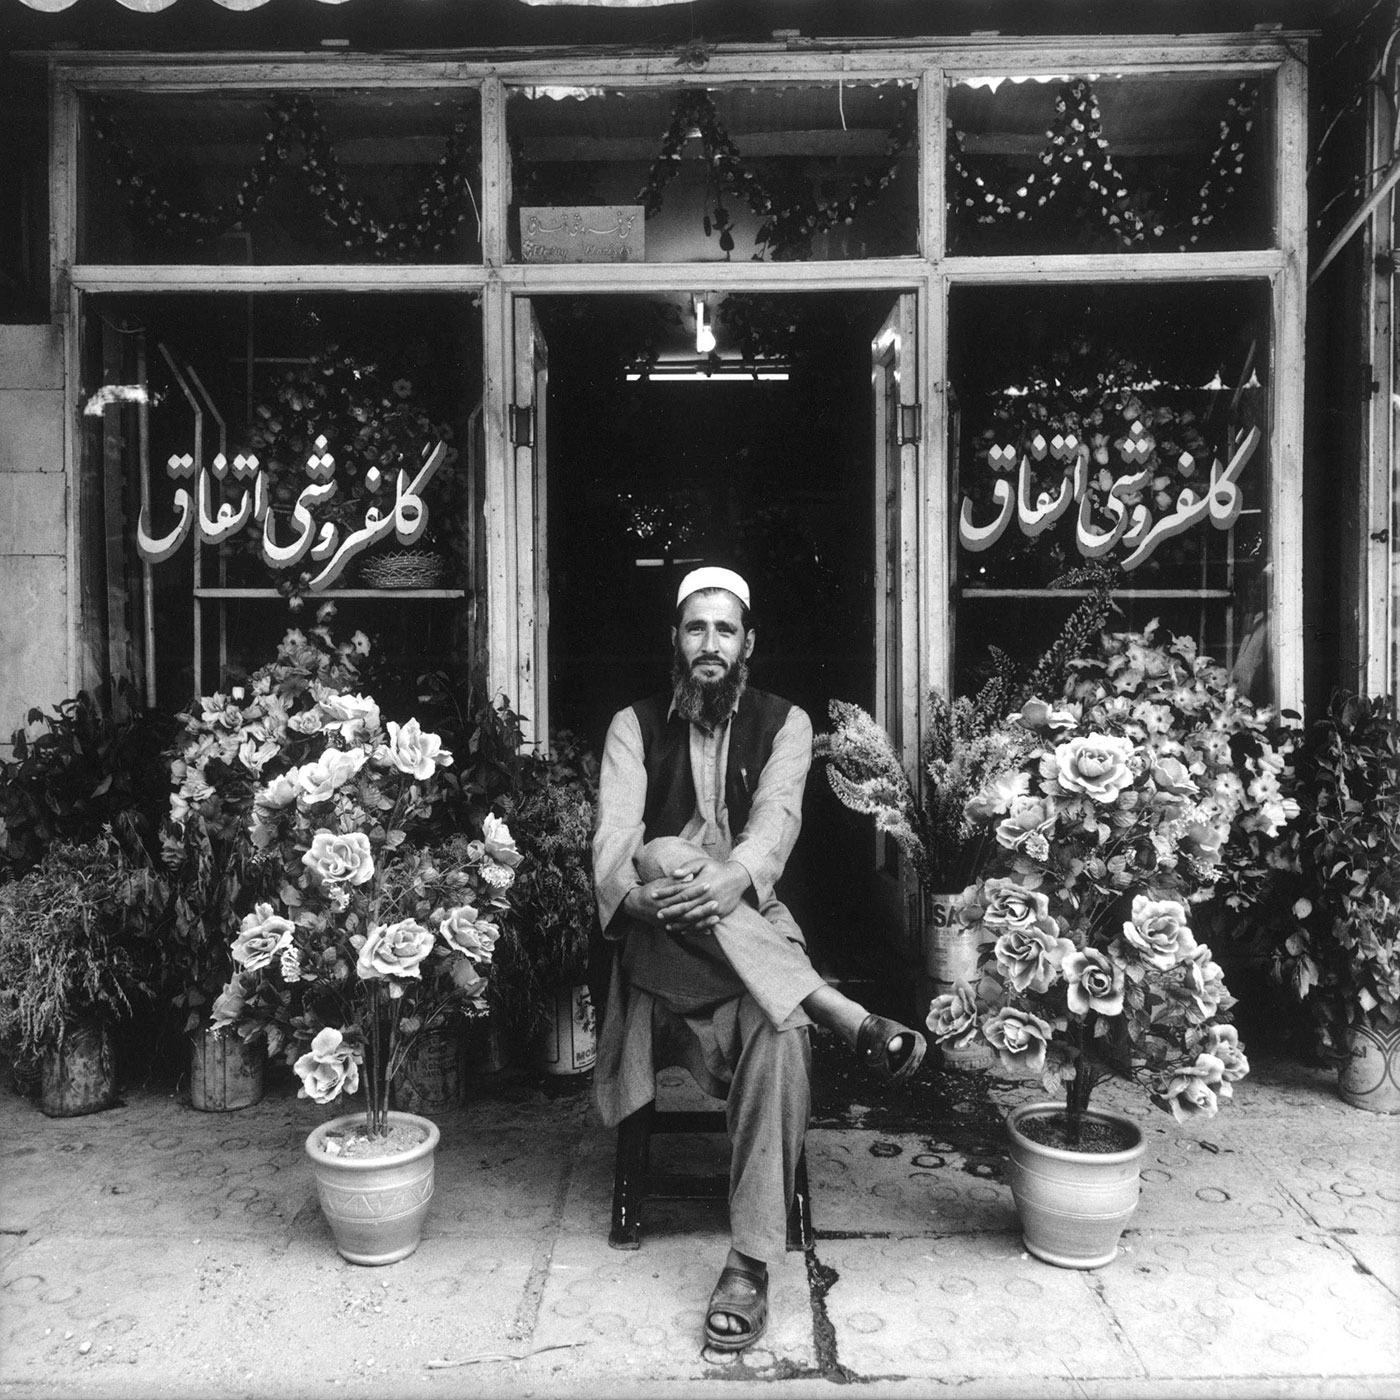 Black and white photograph of a bearded man wearing a hat, sitting in front of a flower shop. There are potted rose bushes to his left and right.